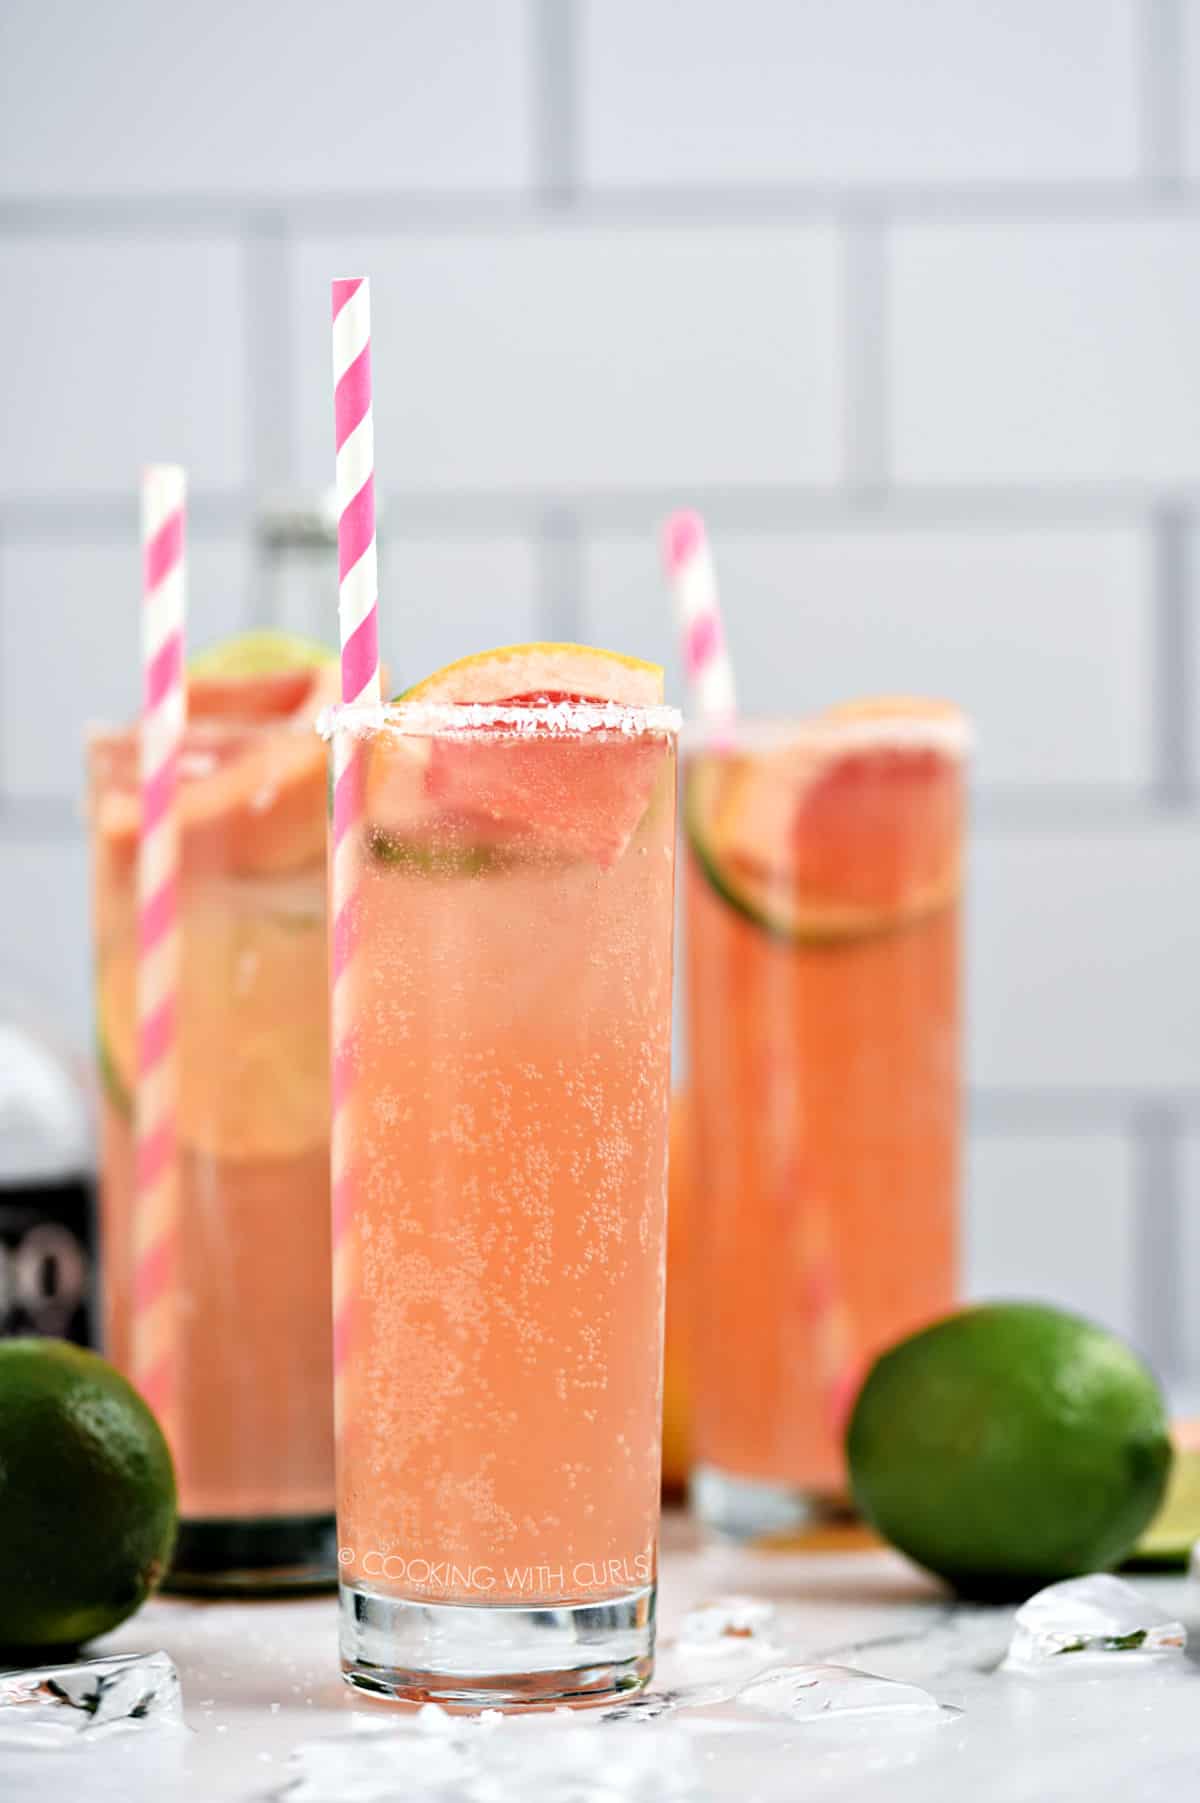 Three bubbly, pink Paloma cocktails in tall glasses garnished with a slice of lime and grapefruit with a pink and white striped straw.